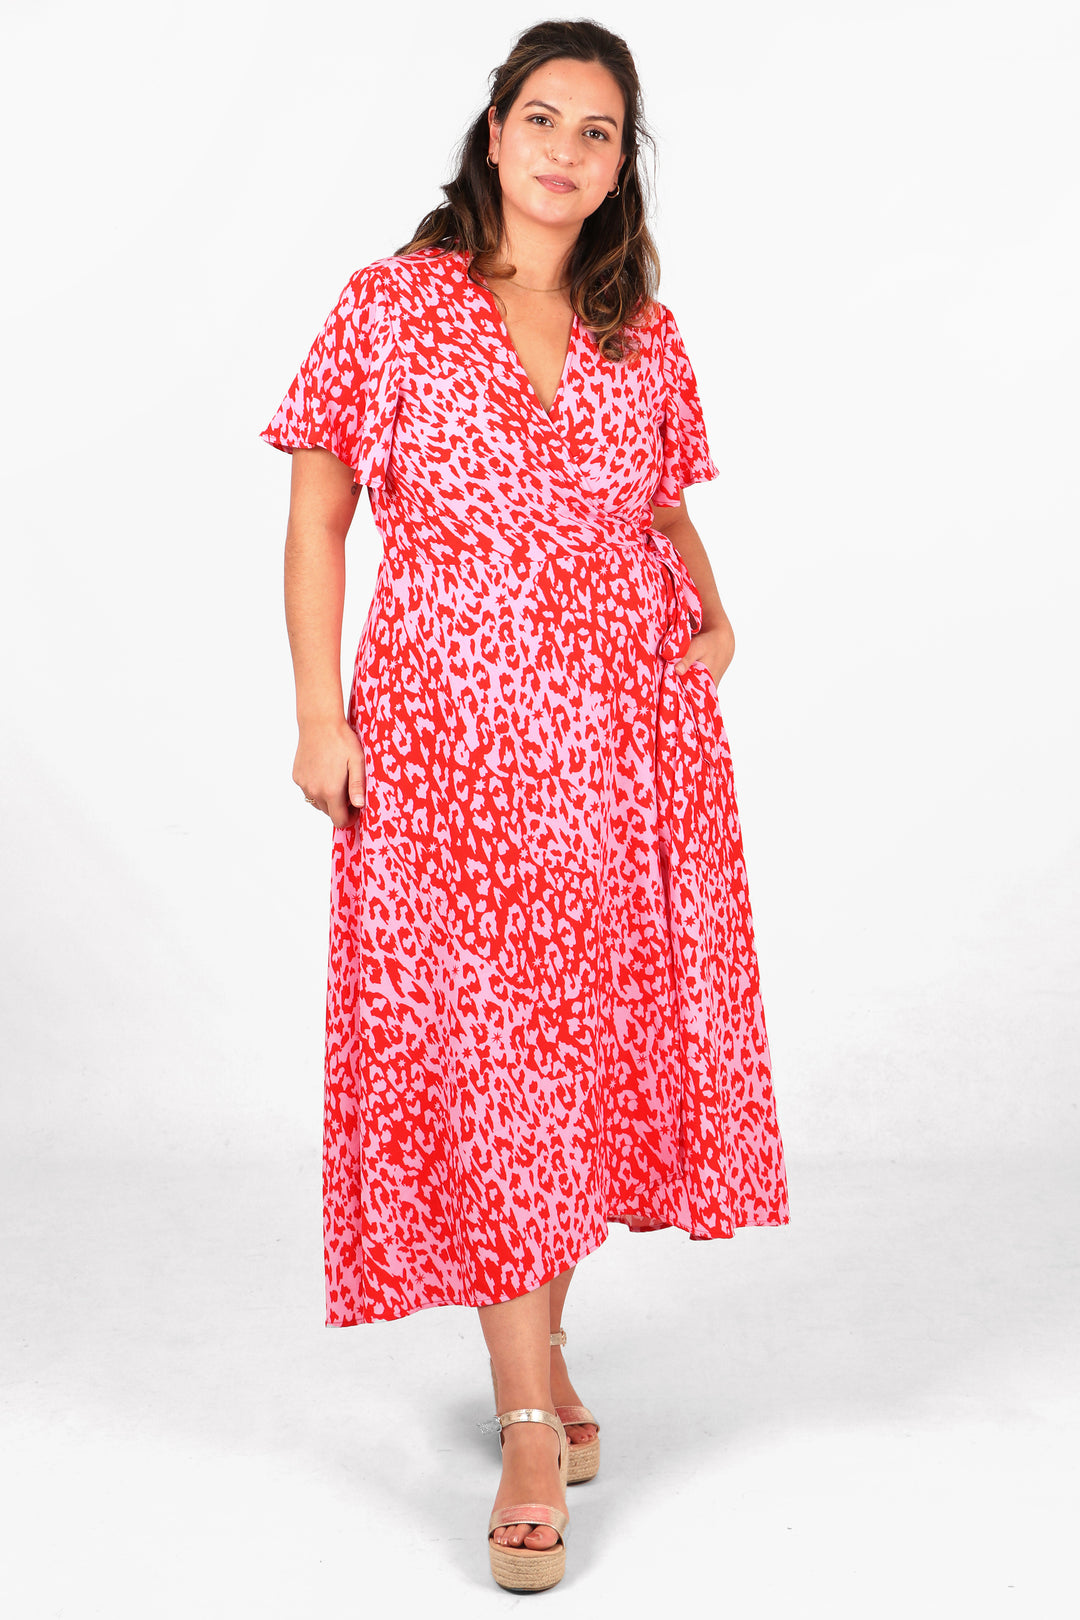 model wearing a midaxi length dip hem wrap dress with short angel sleeves and an all over pink leopard print pattern